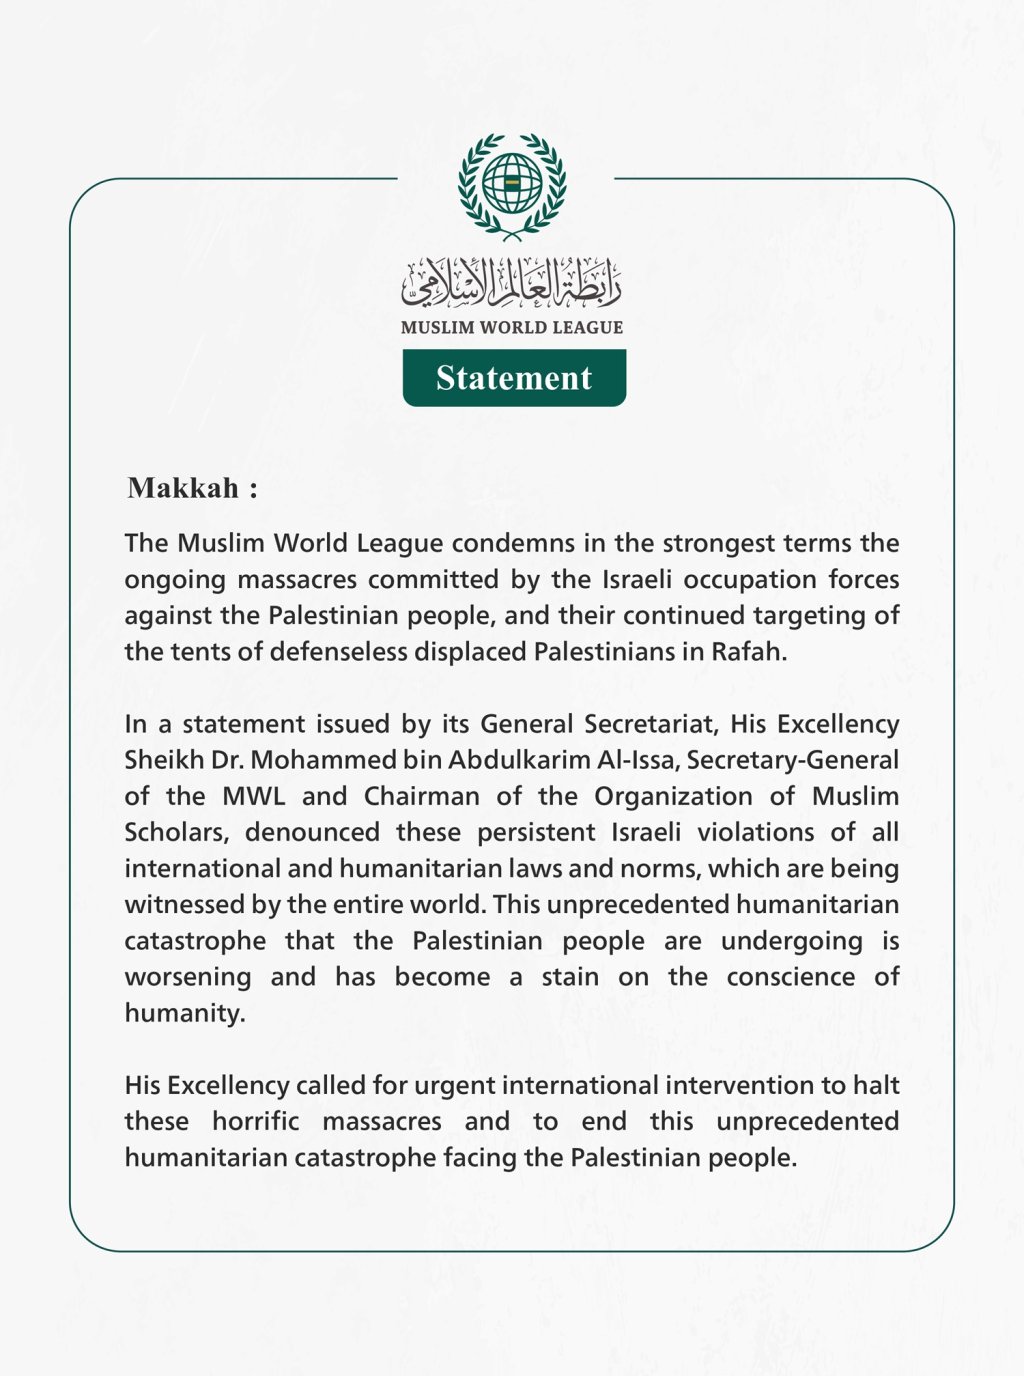 The Muslim World League (MWL) strongly condemns the continued genocidal massacres perpetrated by Israeli occupation forces against the Palestinian people. 